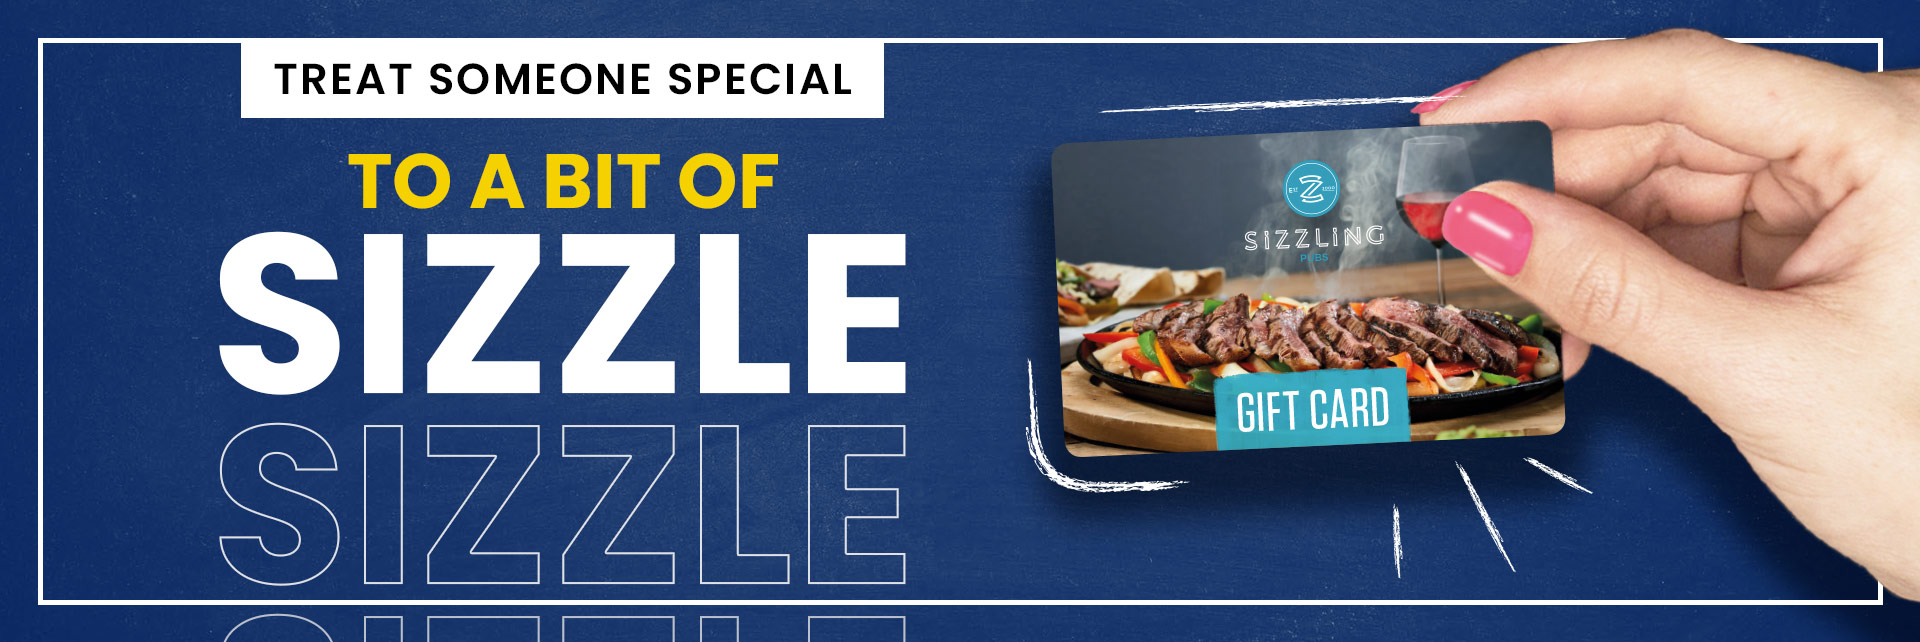 Sizzling Pubs Gift Card at Sun in Wakefield